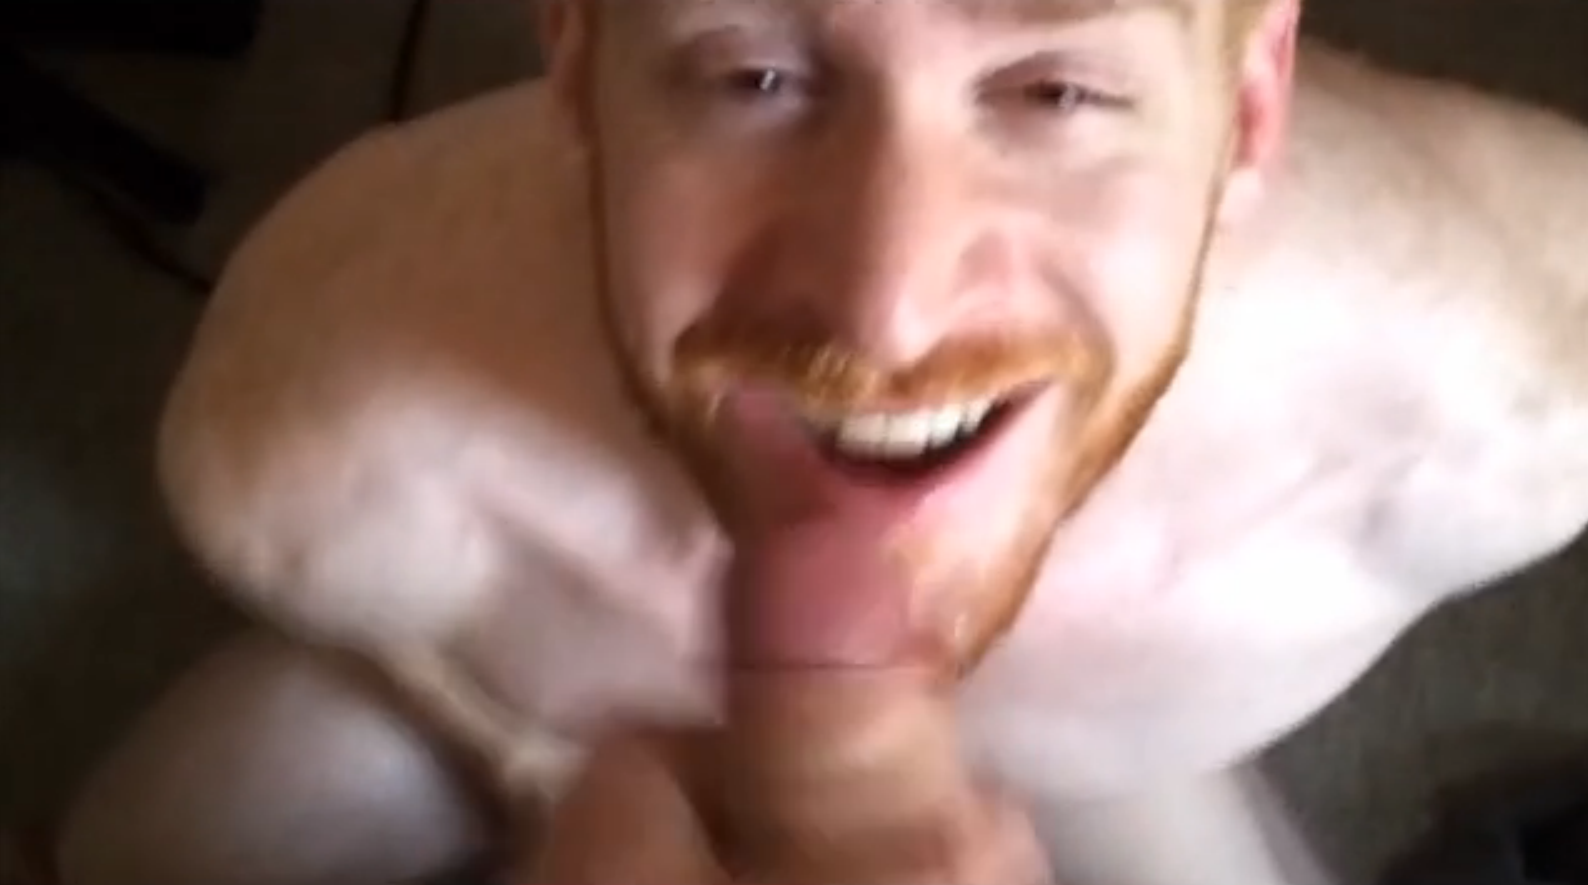 Ginger power bottom Leander in an amateur homemade sex tape with XTube user megahungdude.